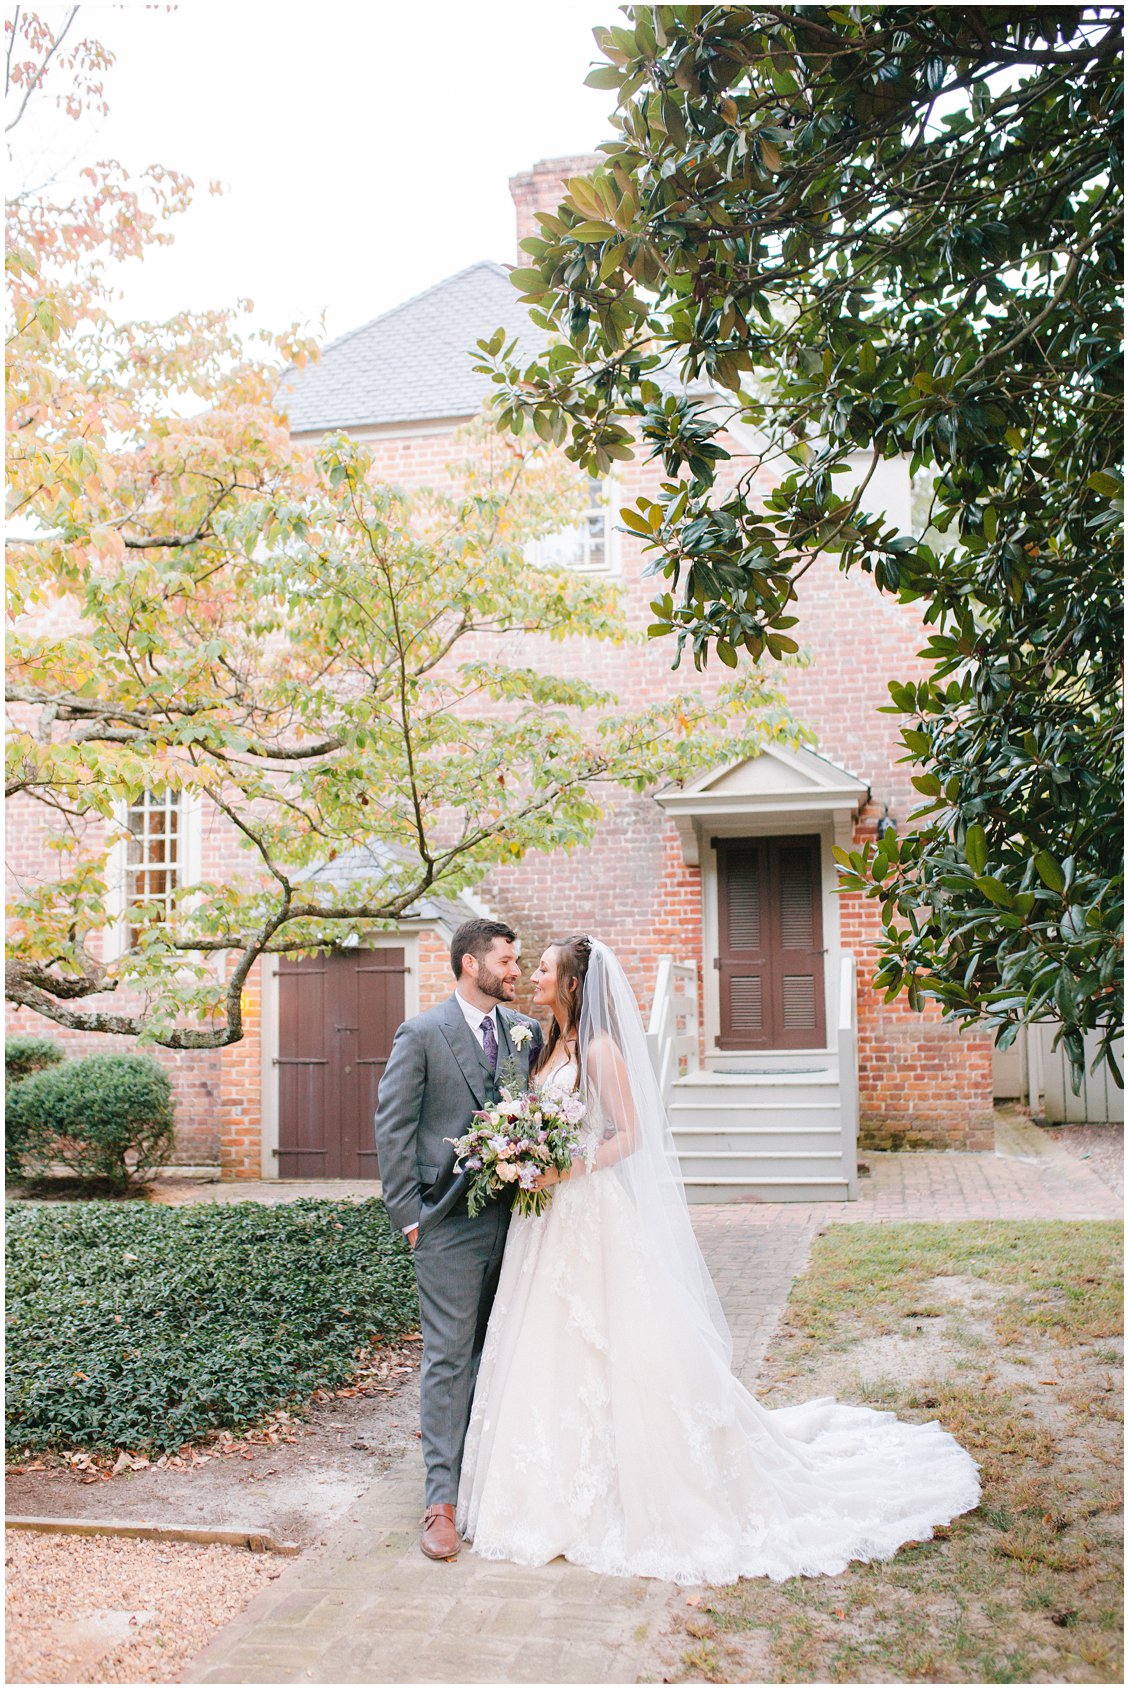 Intimate outdoor wedding at Seven Springs Farm & Manor Richmond VA captured by Tara & Stephen of Pattengale Photography